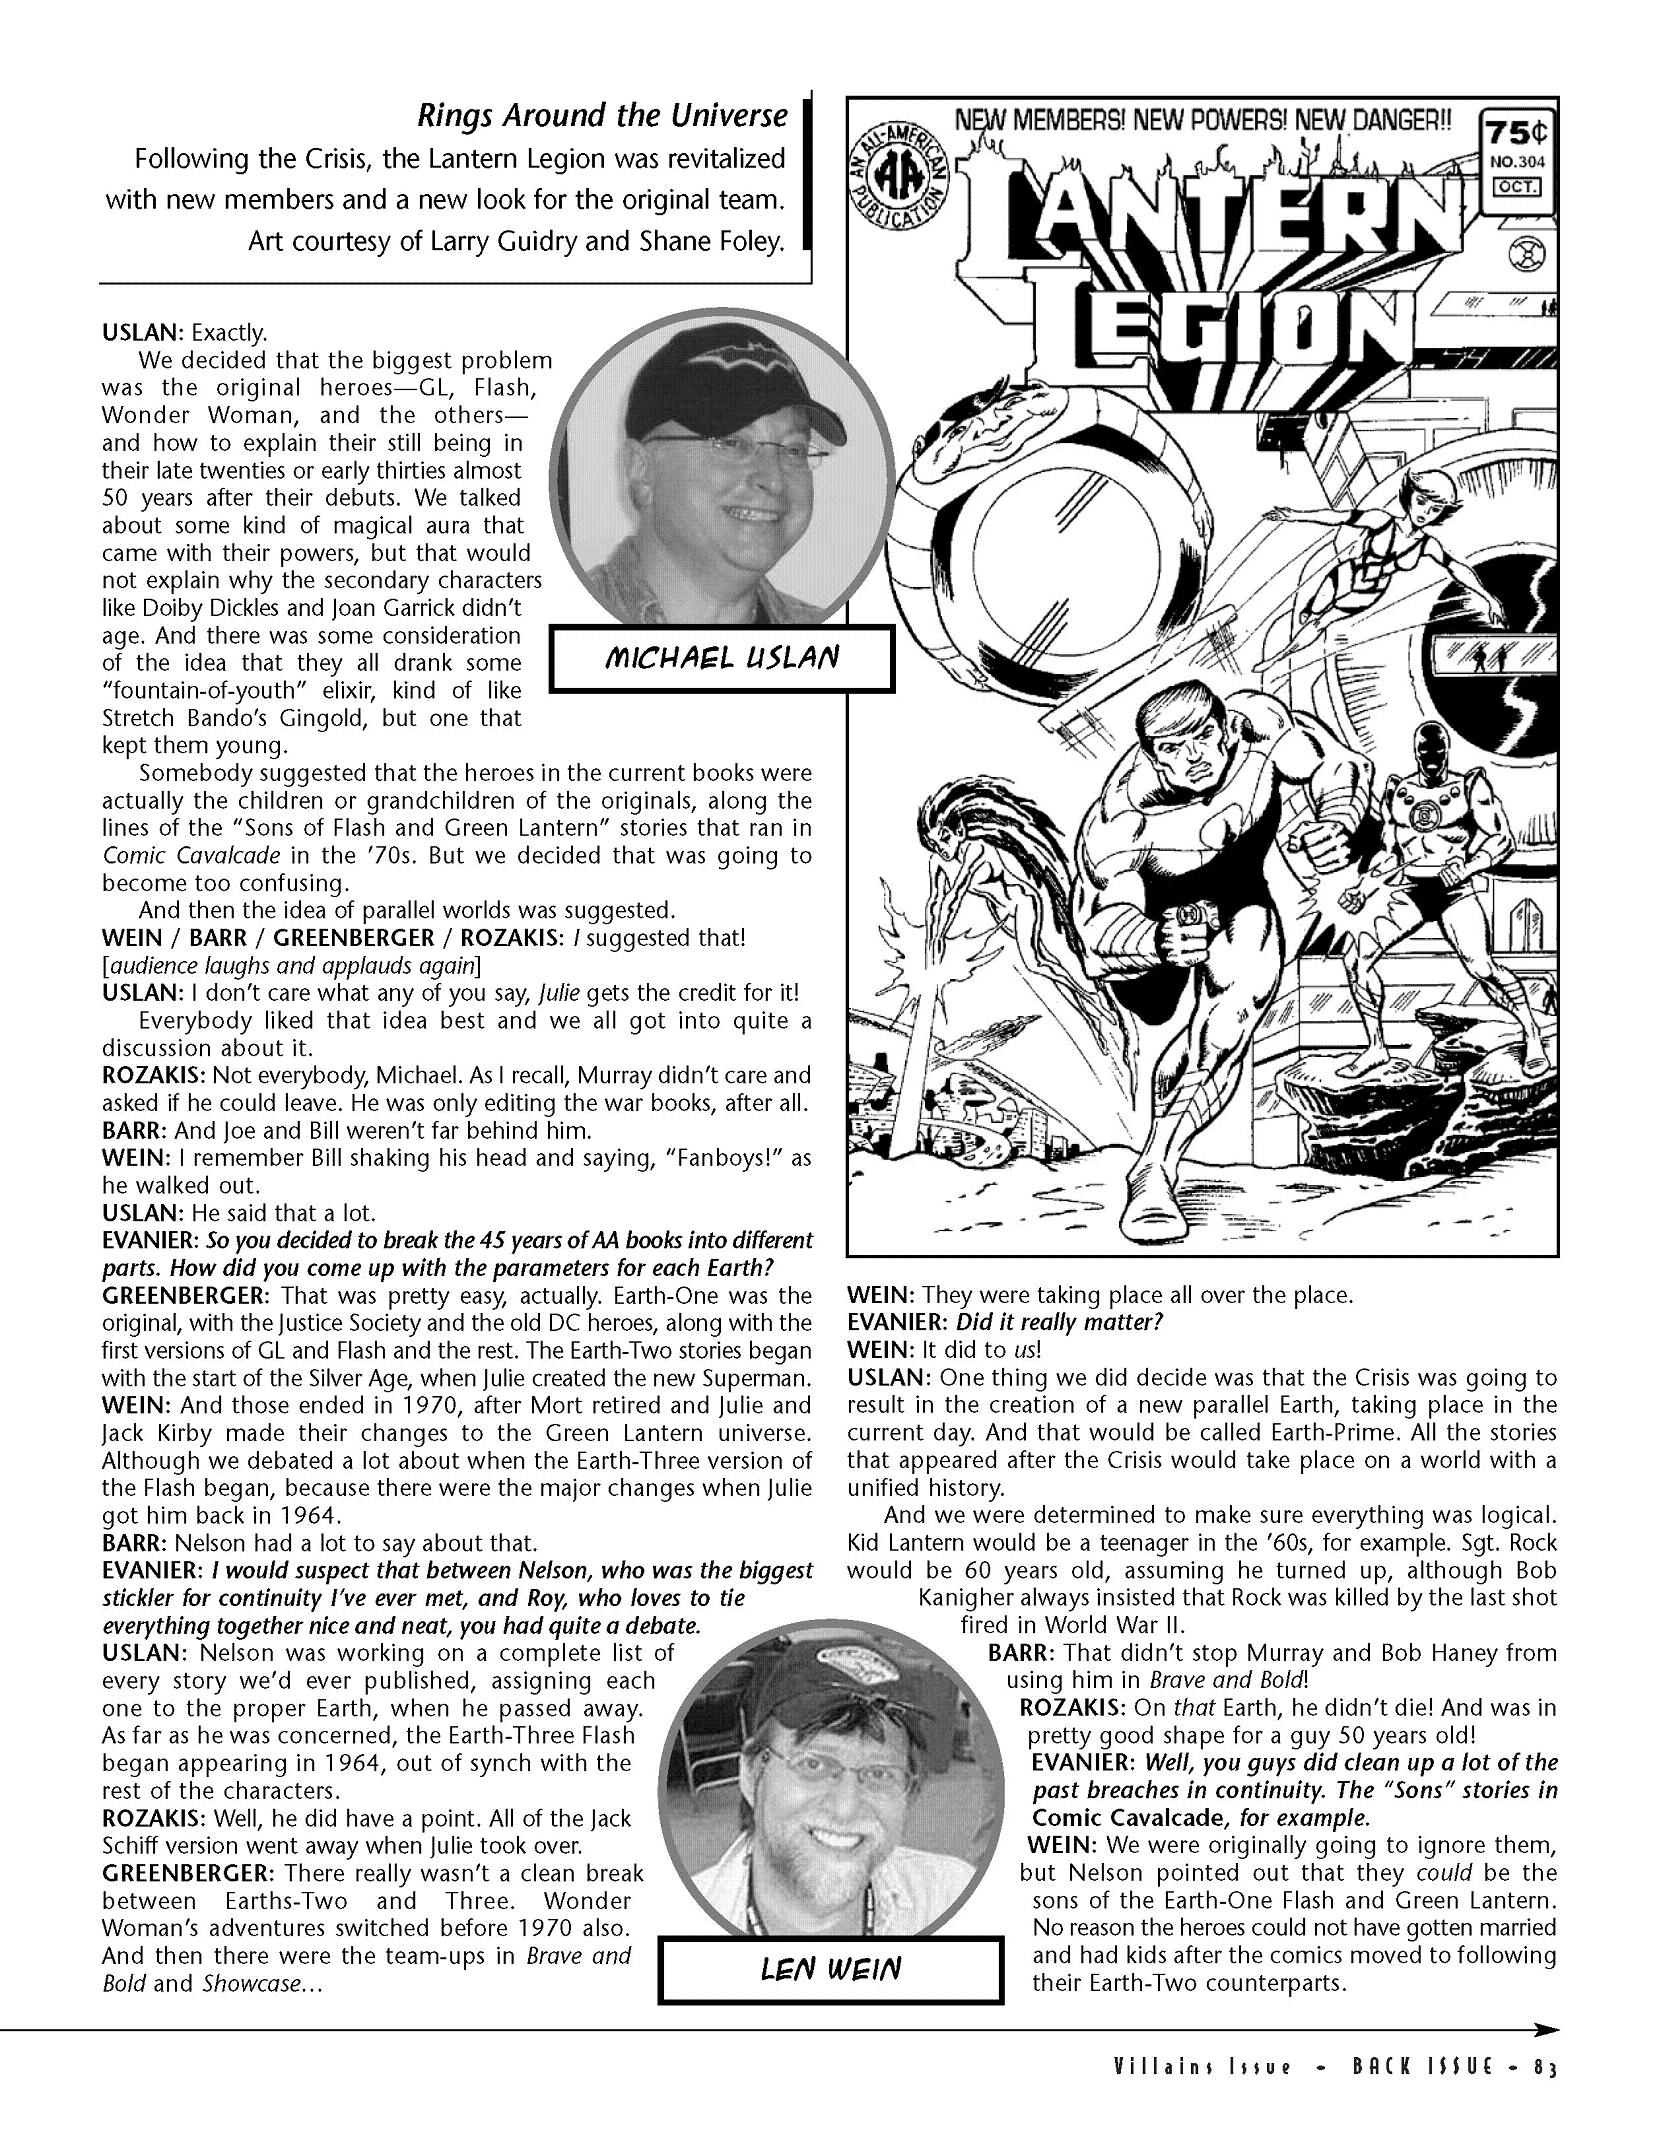 Read online Back Issue comic -  Issue #35 - 85